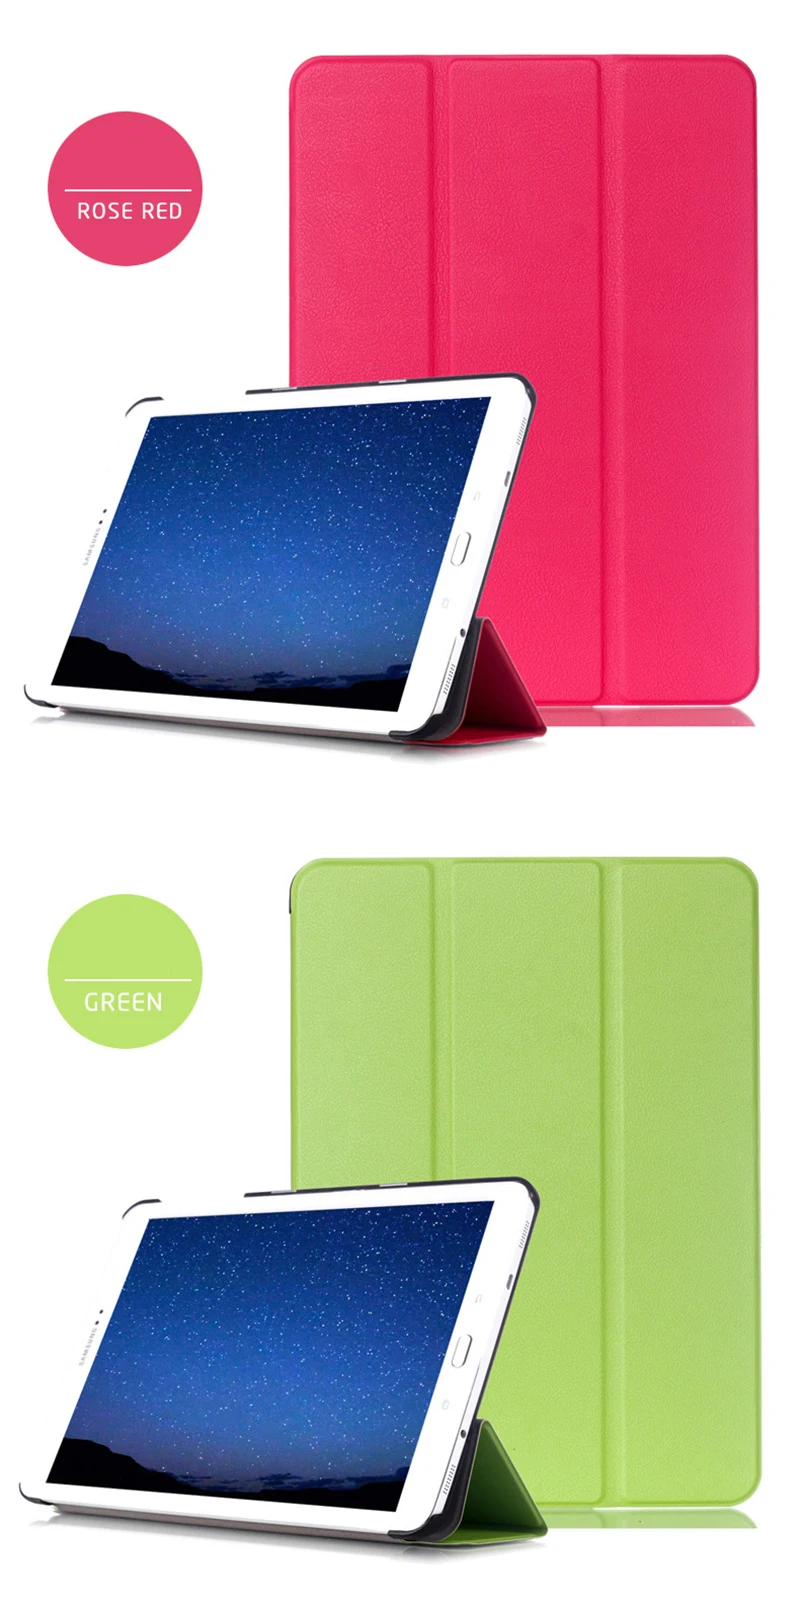 Tab S2 9.7 Case cover SM-T813 T819 Slim Smart Case Cover for Samsung Galaxy Tab S2 9.7 SM-T810 T815 Tablet with Auto Sleep/Wake